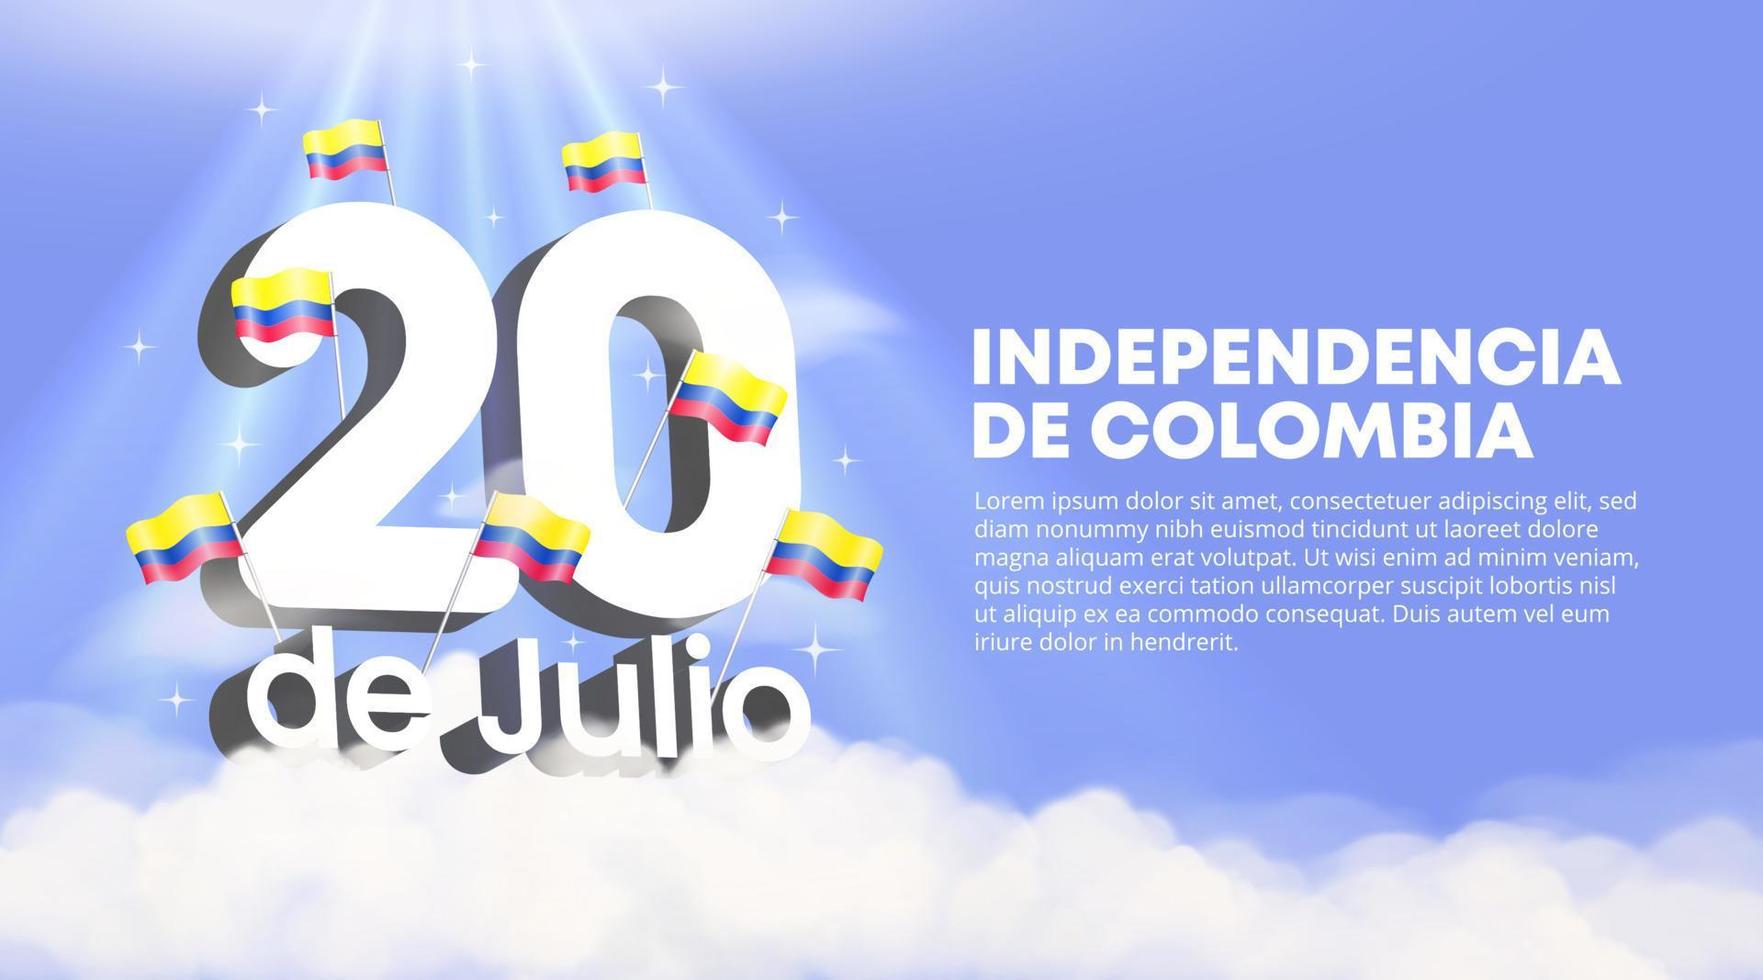 Independencia de Colombia or Colombia independence day background with an illustration of 20 de Julio text vector